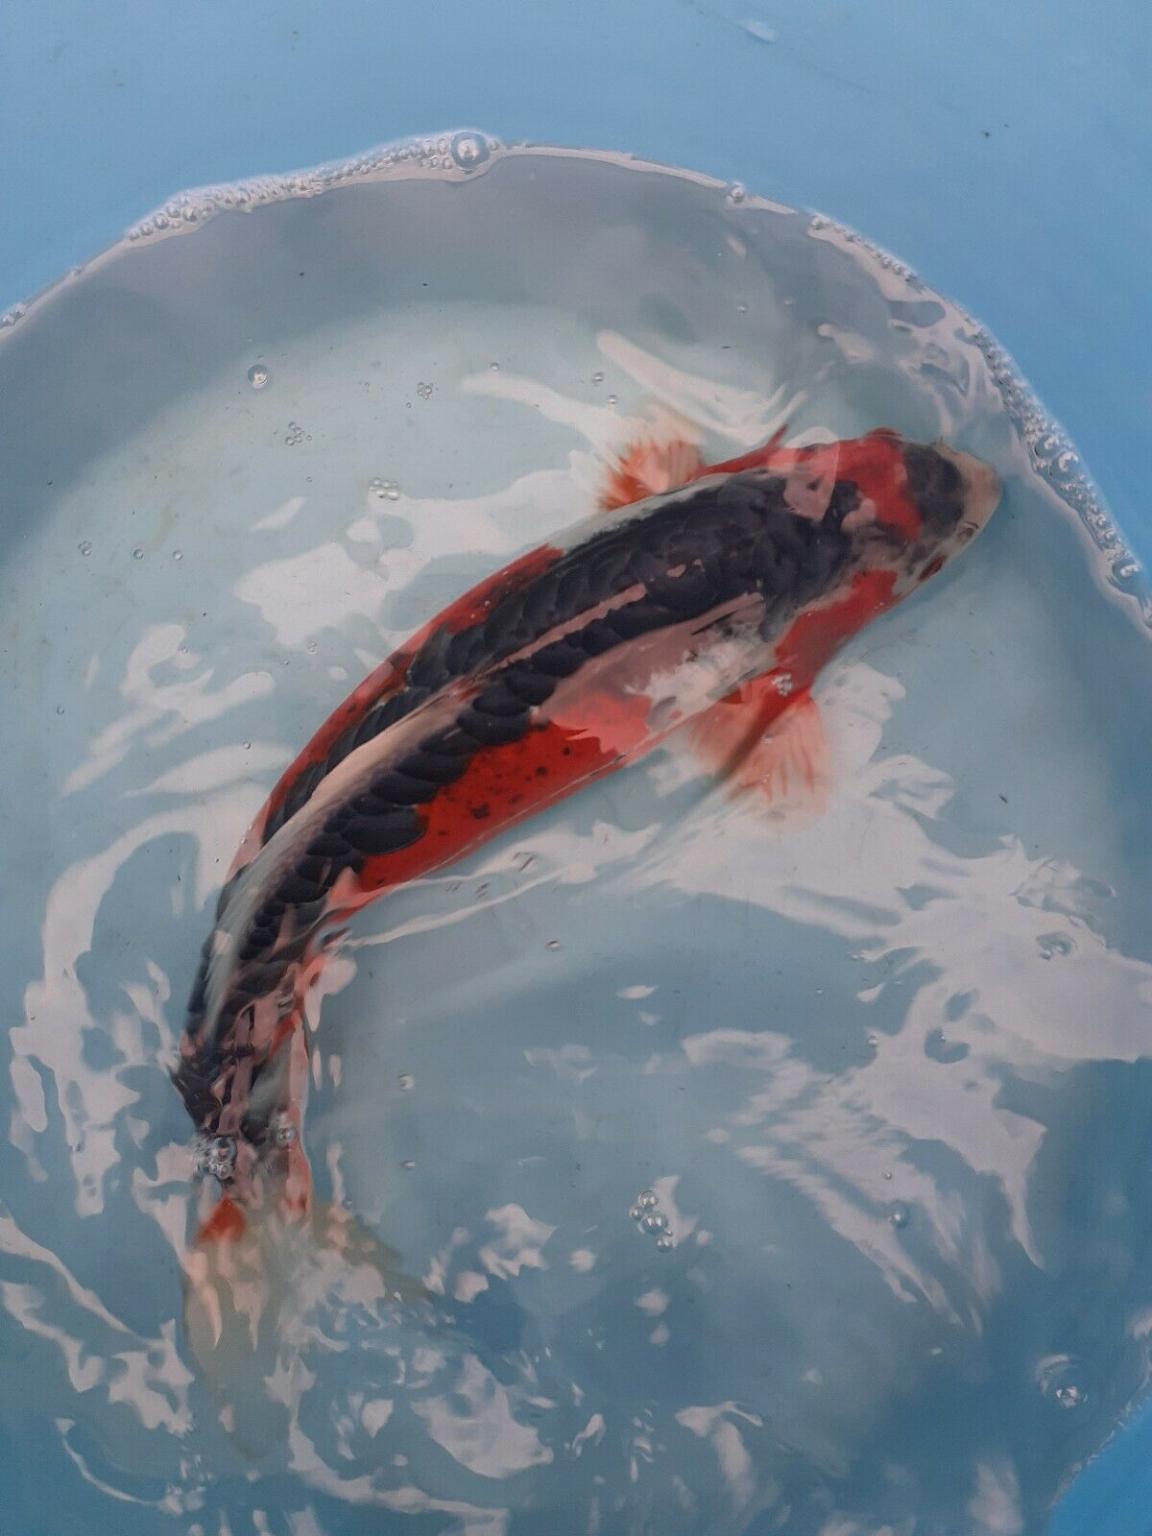 KOI CARP FOR SALE in Shotton for £55.00 for sale | Shpock